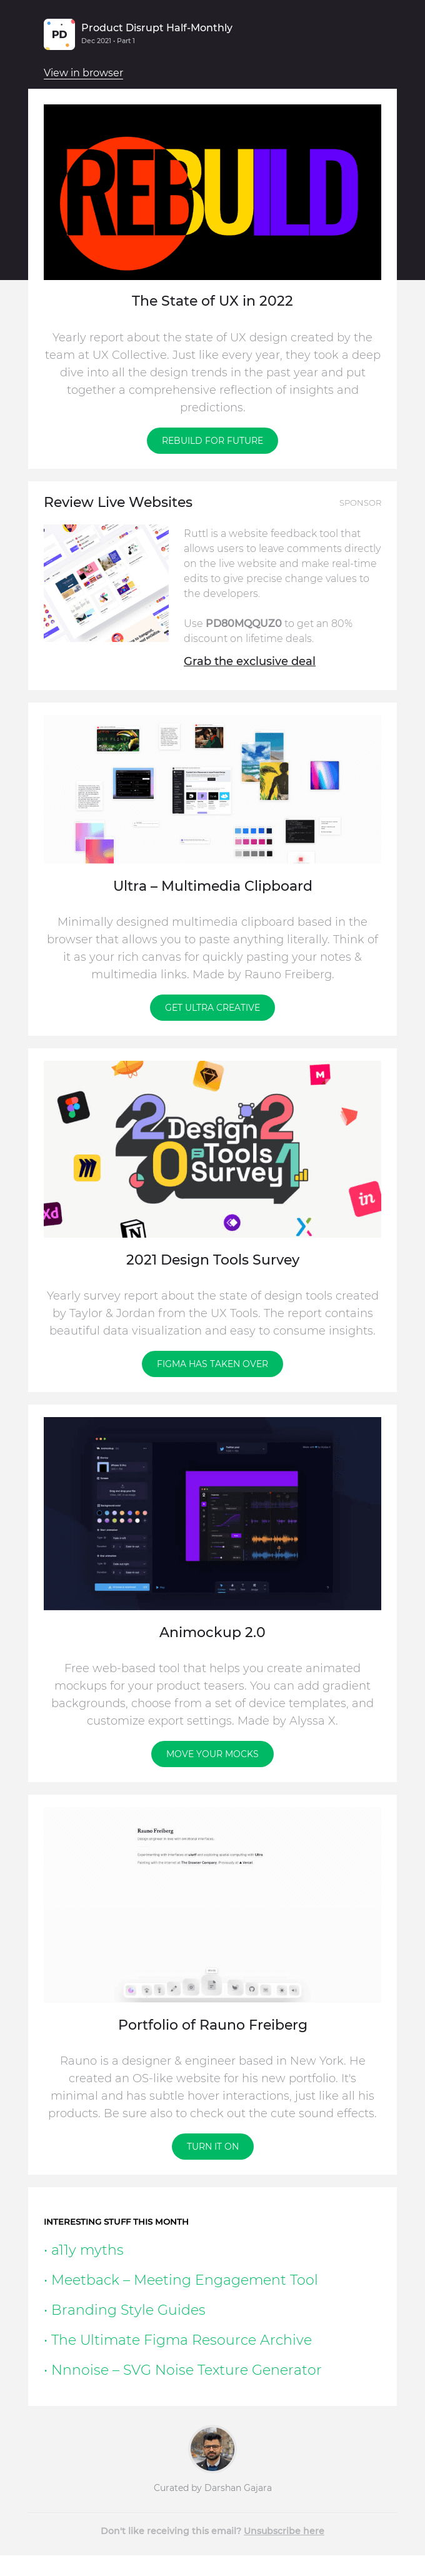 108 / State of the UX in 2022, design tools survey, multimedia clipboard and more free resources